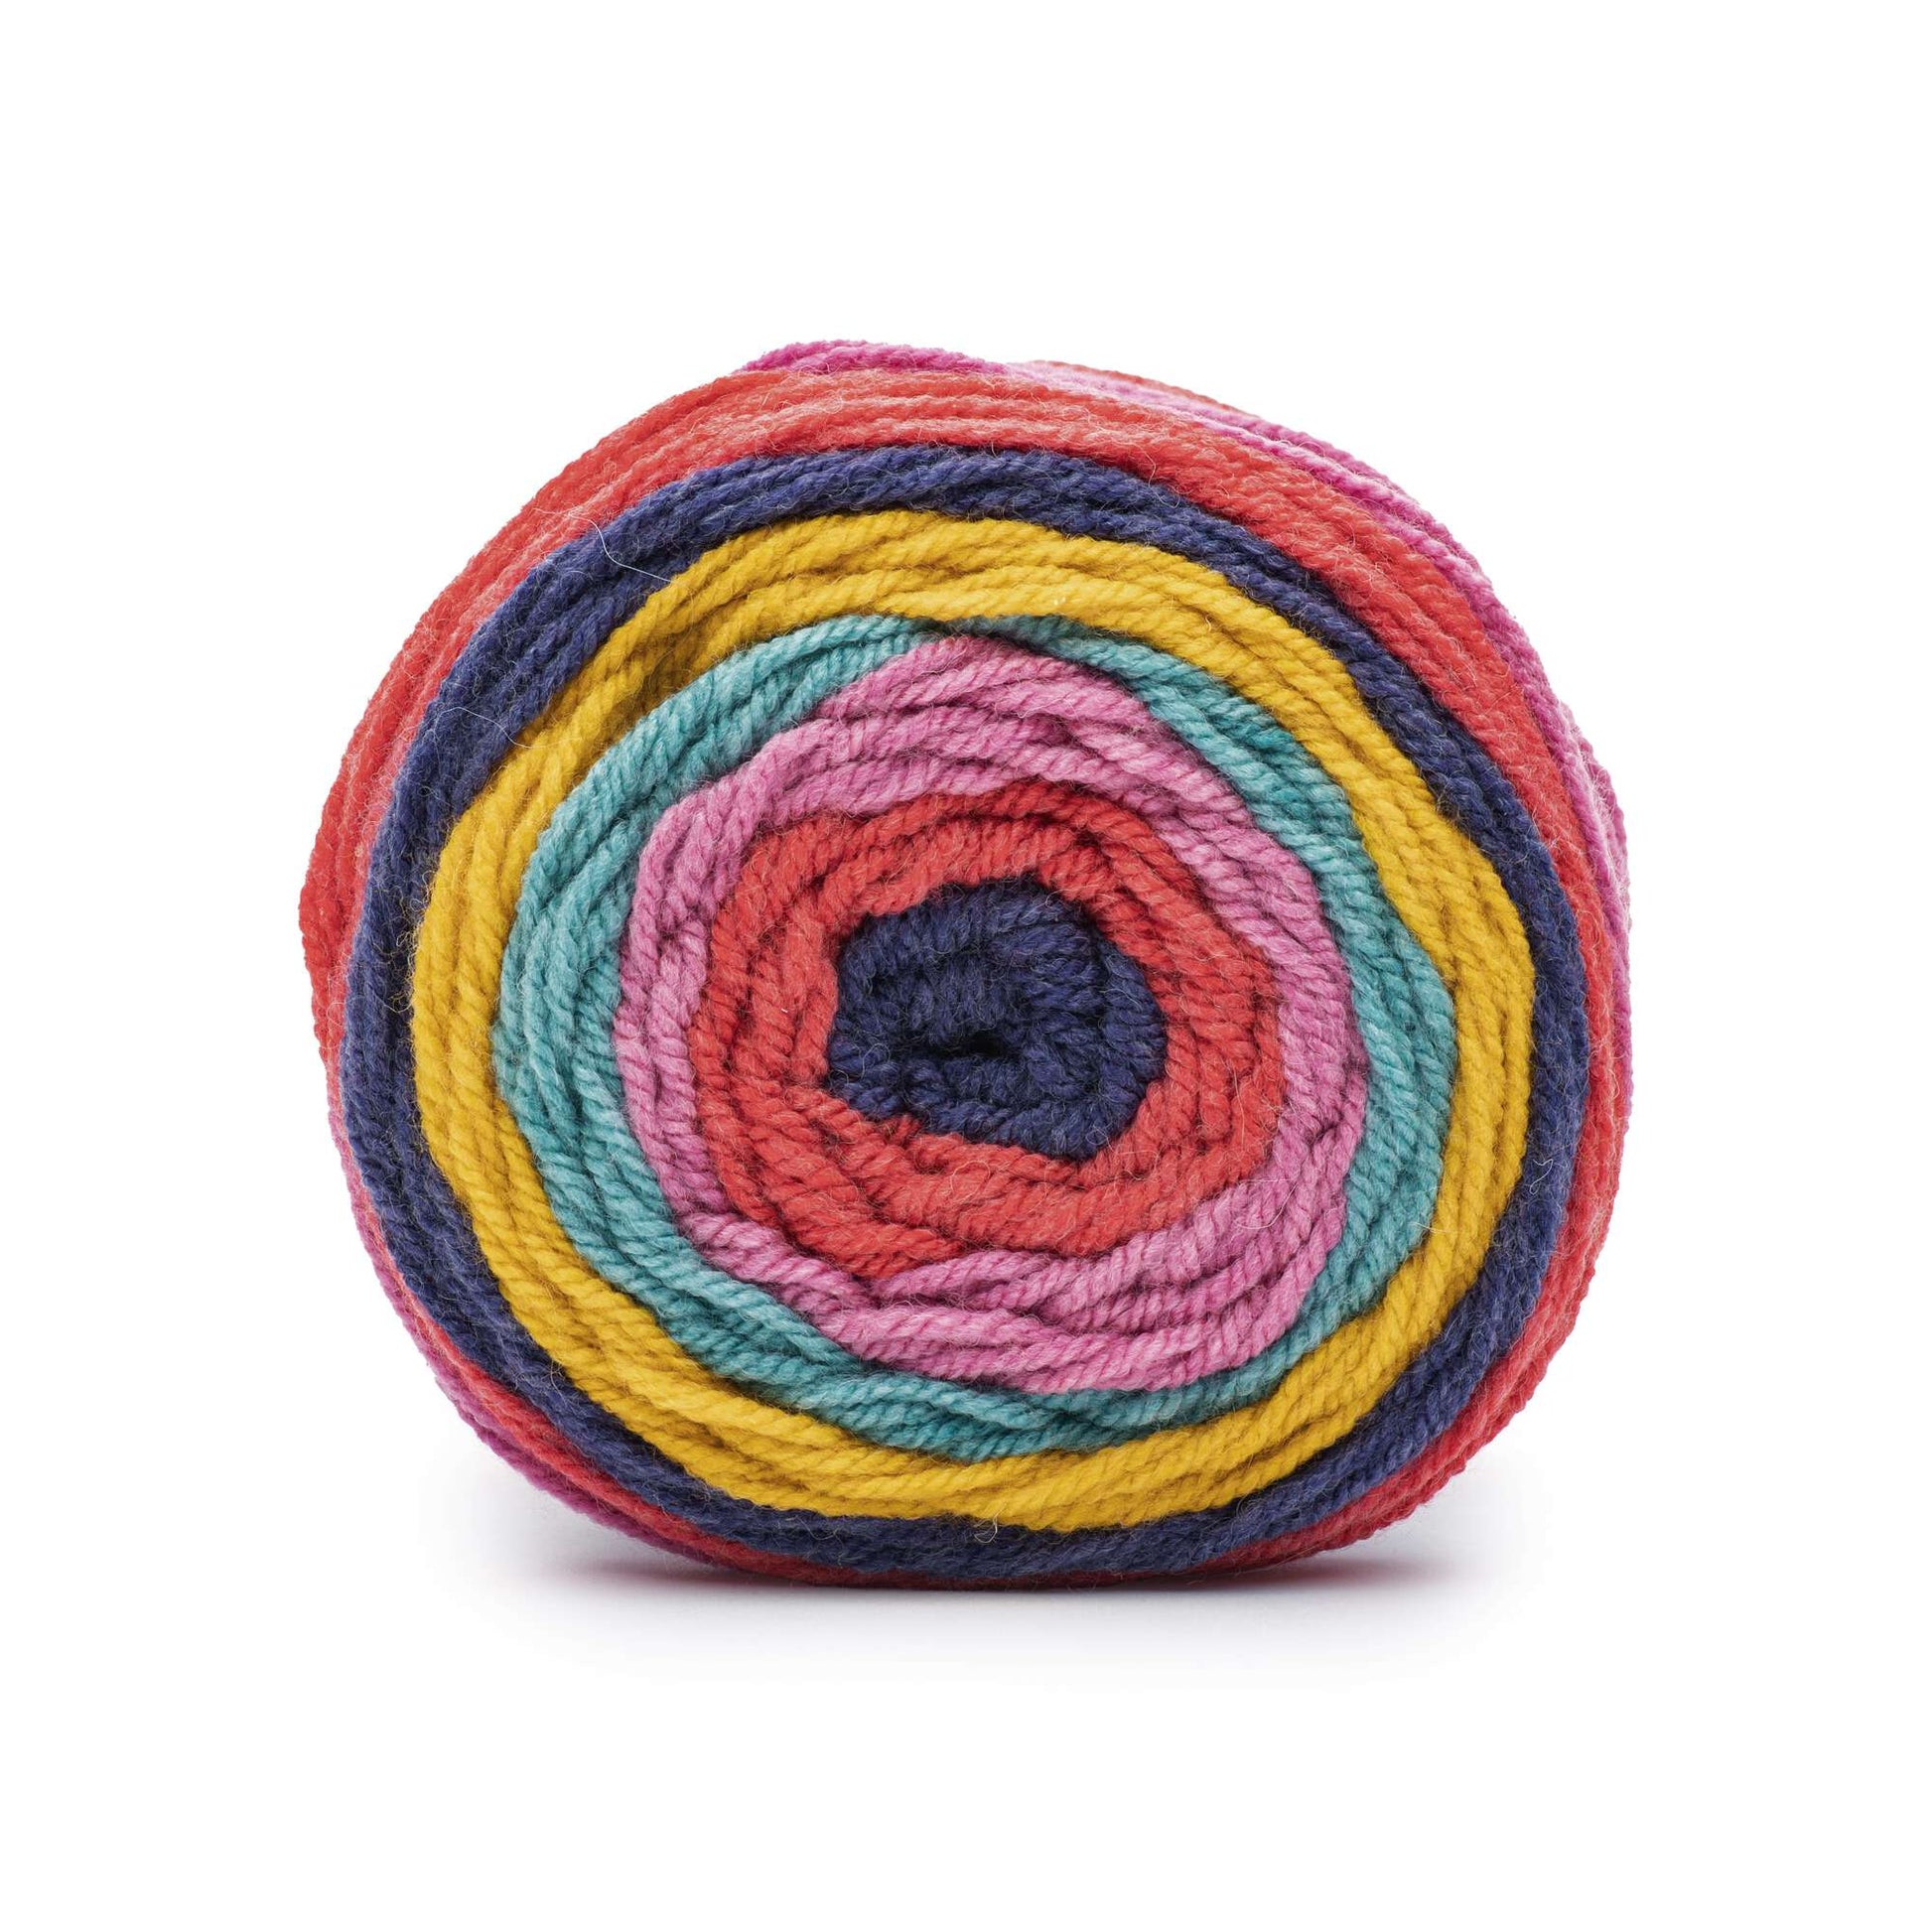 Caron Cakes Yarn Tropical Frosting